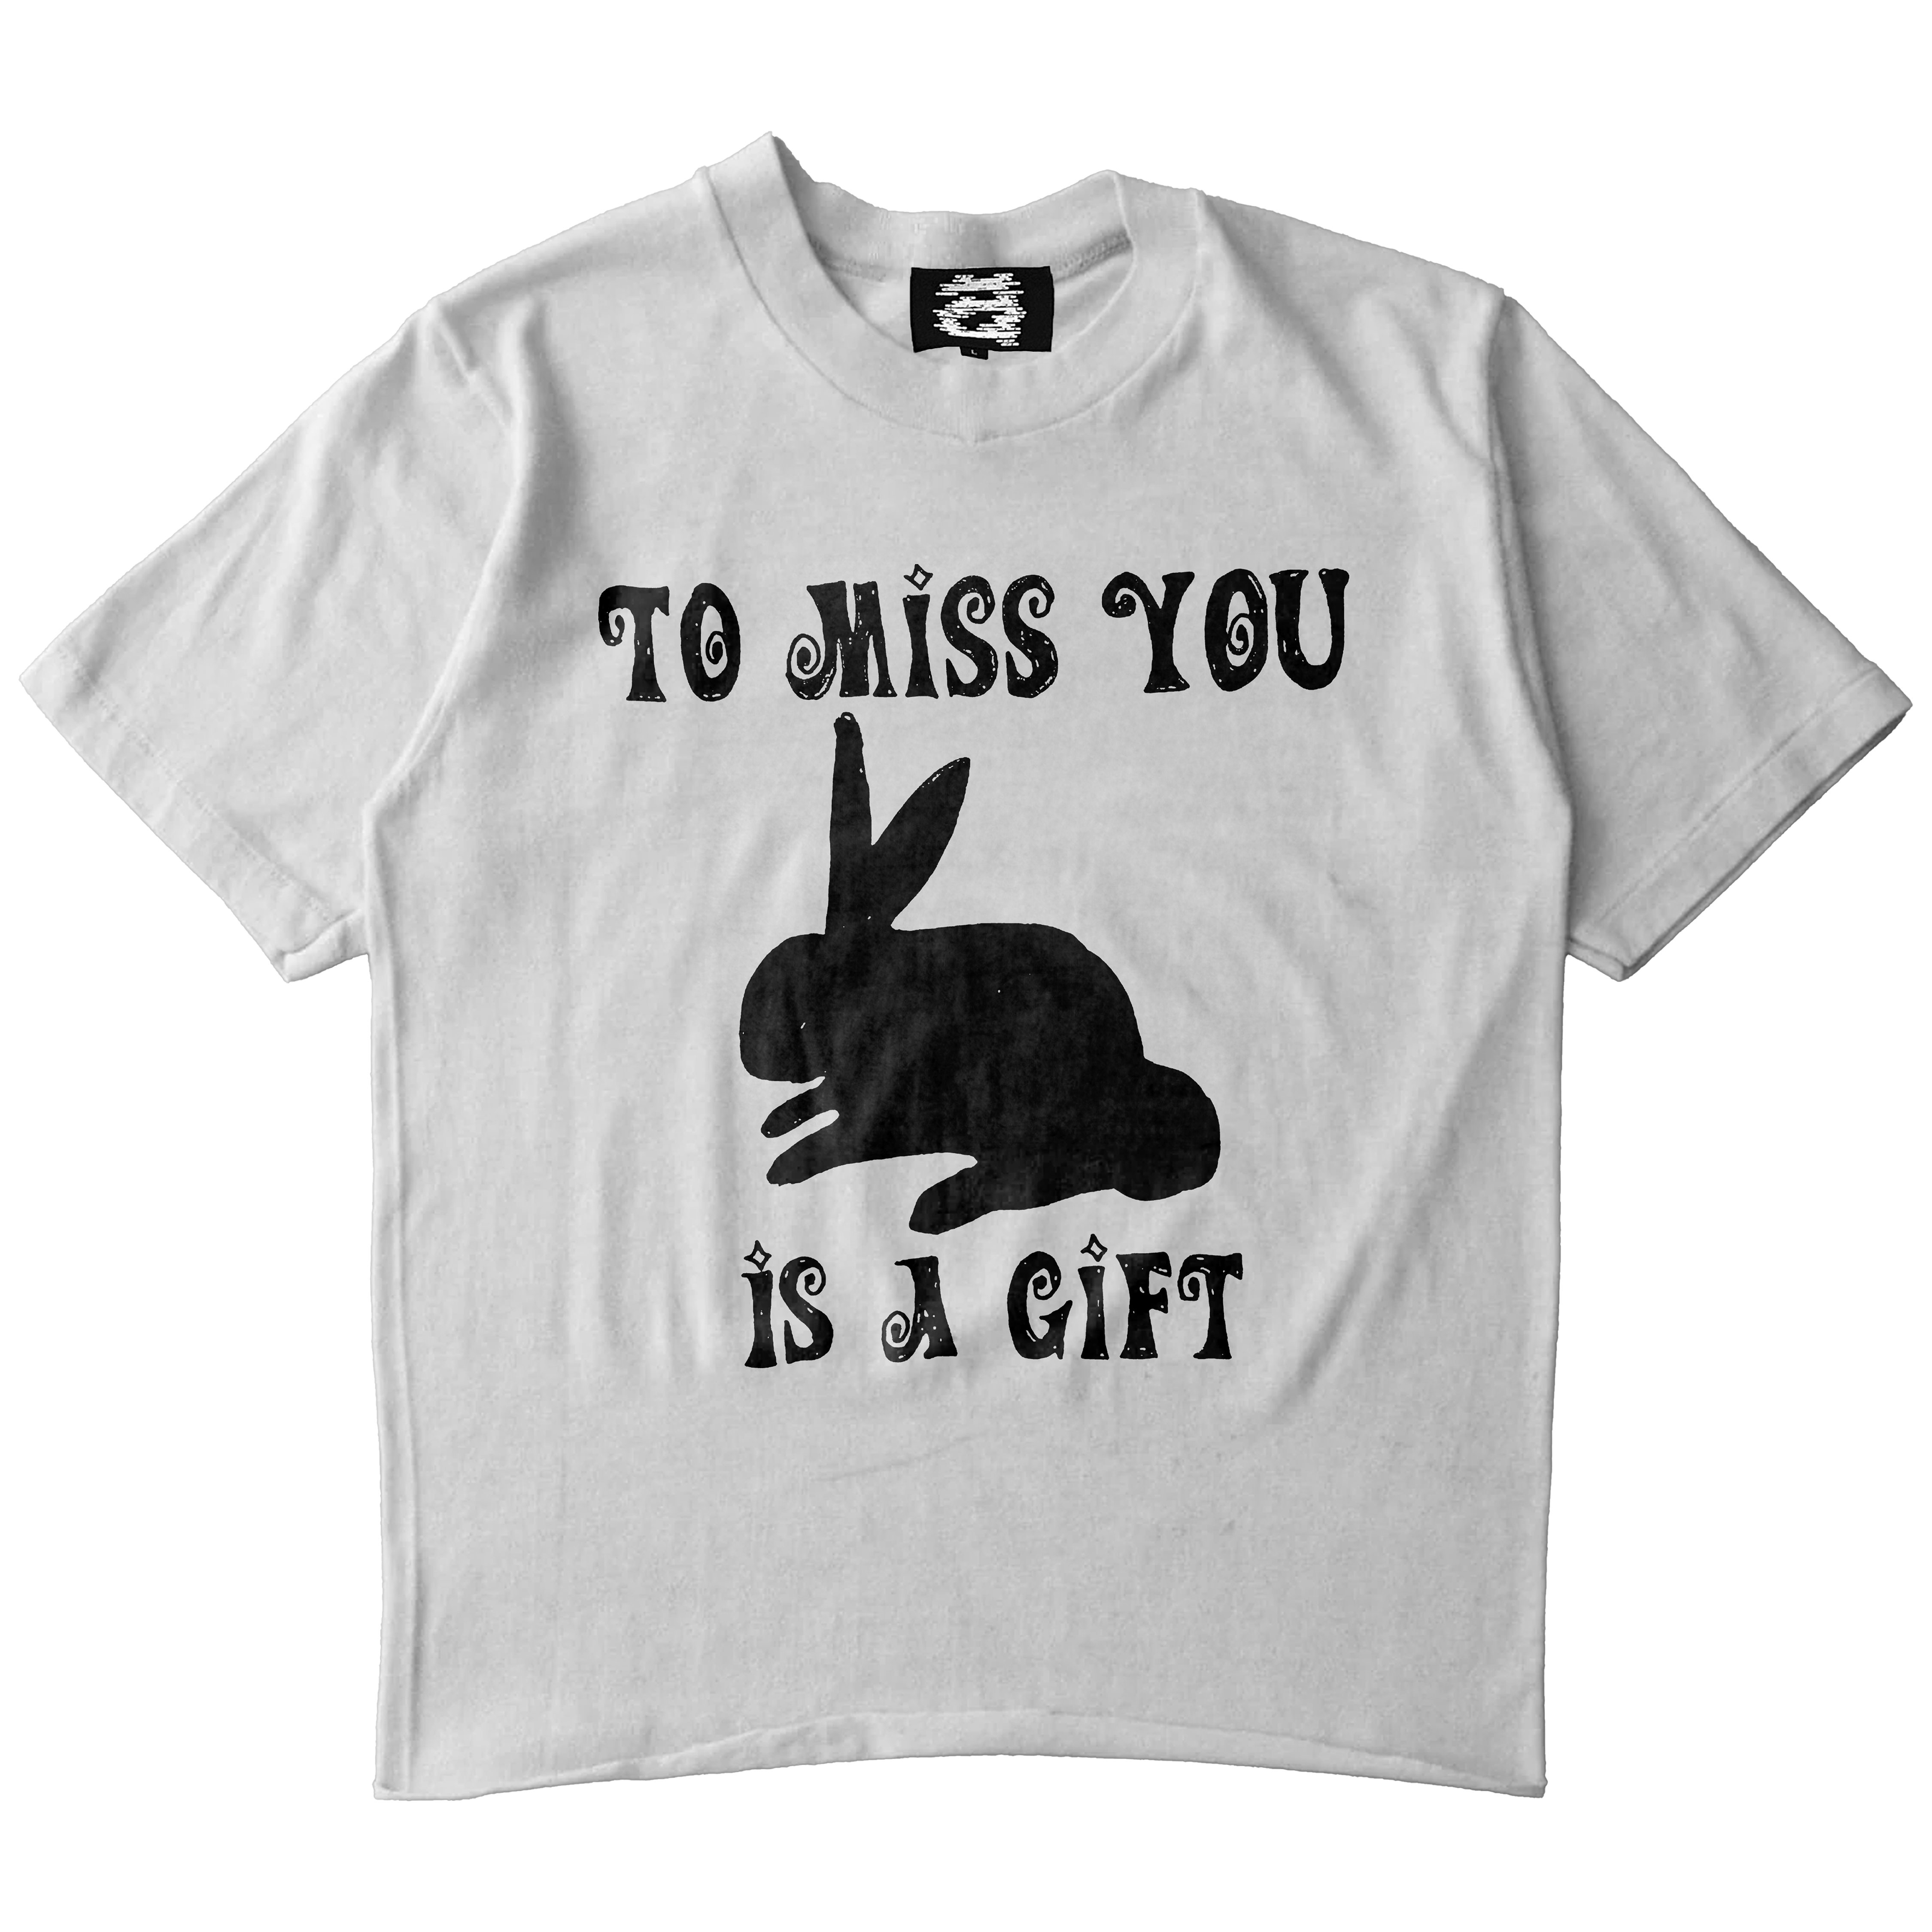 (A) MISS YOU TEE